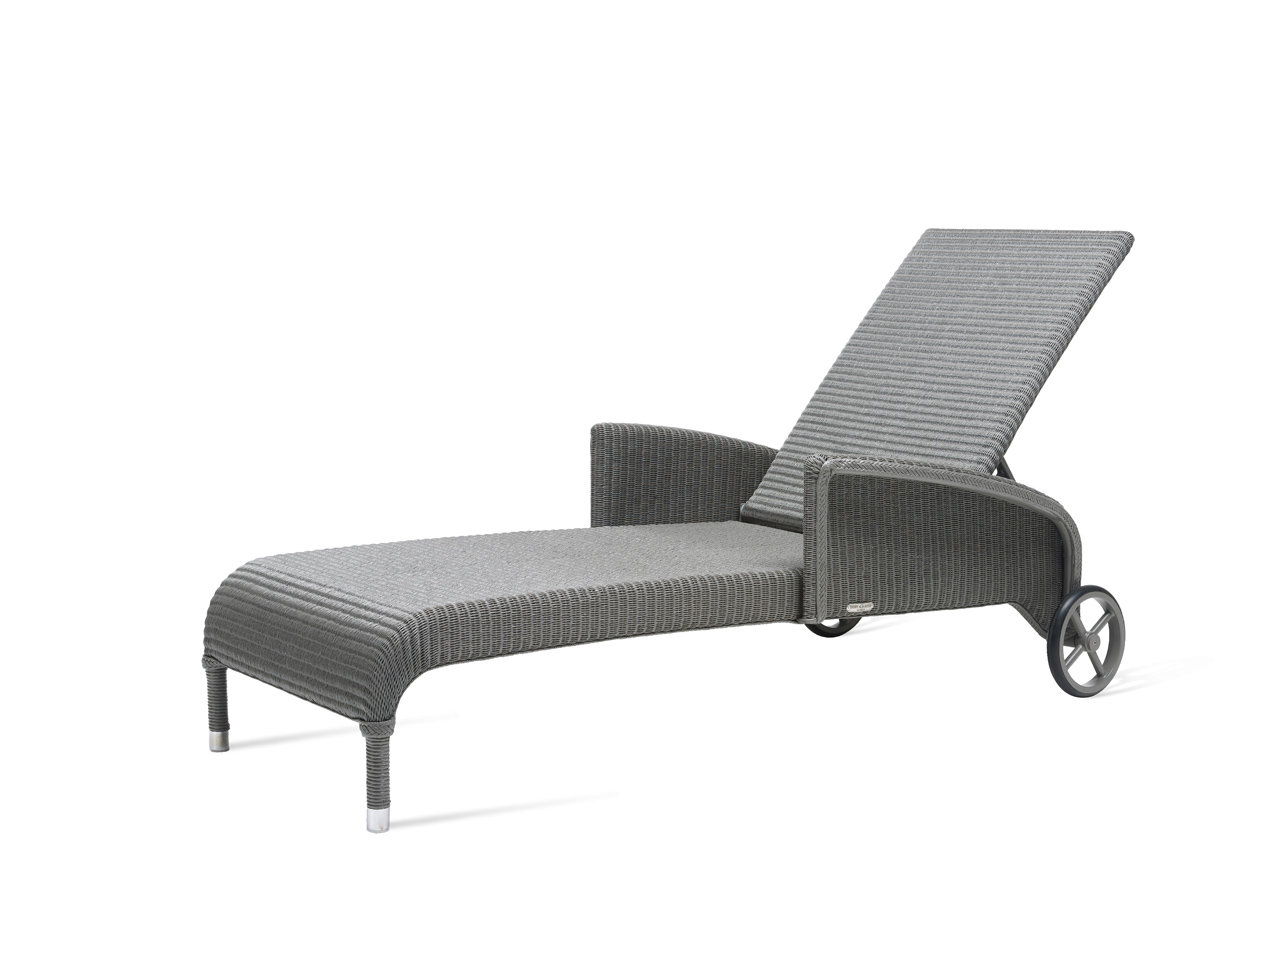 DOVILE Sunlounger with Arms